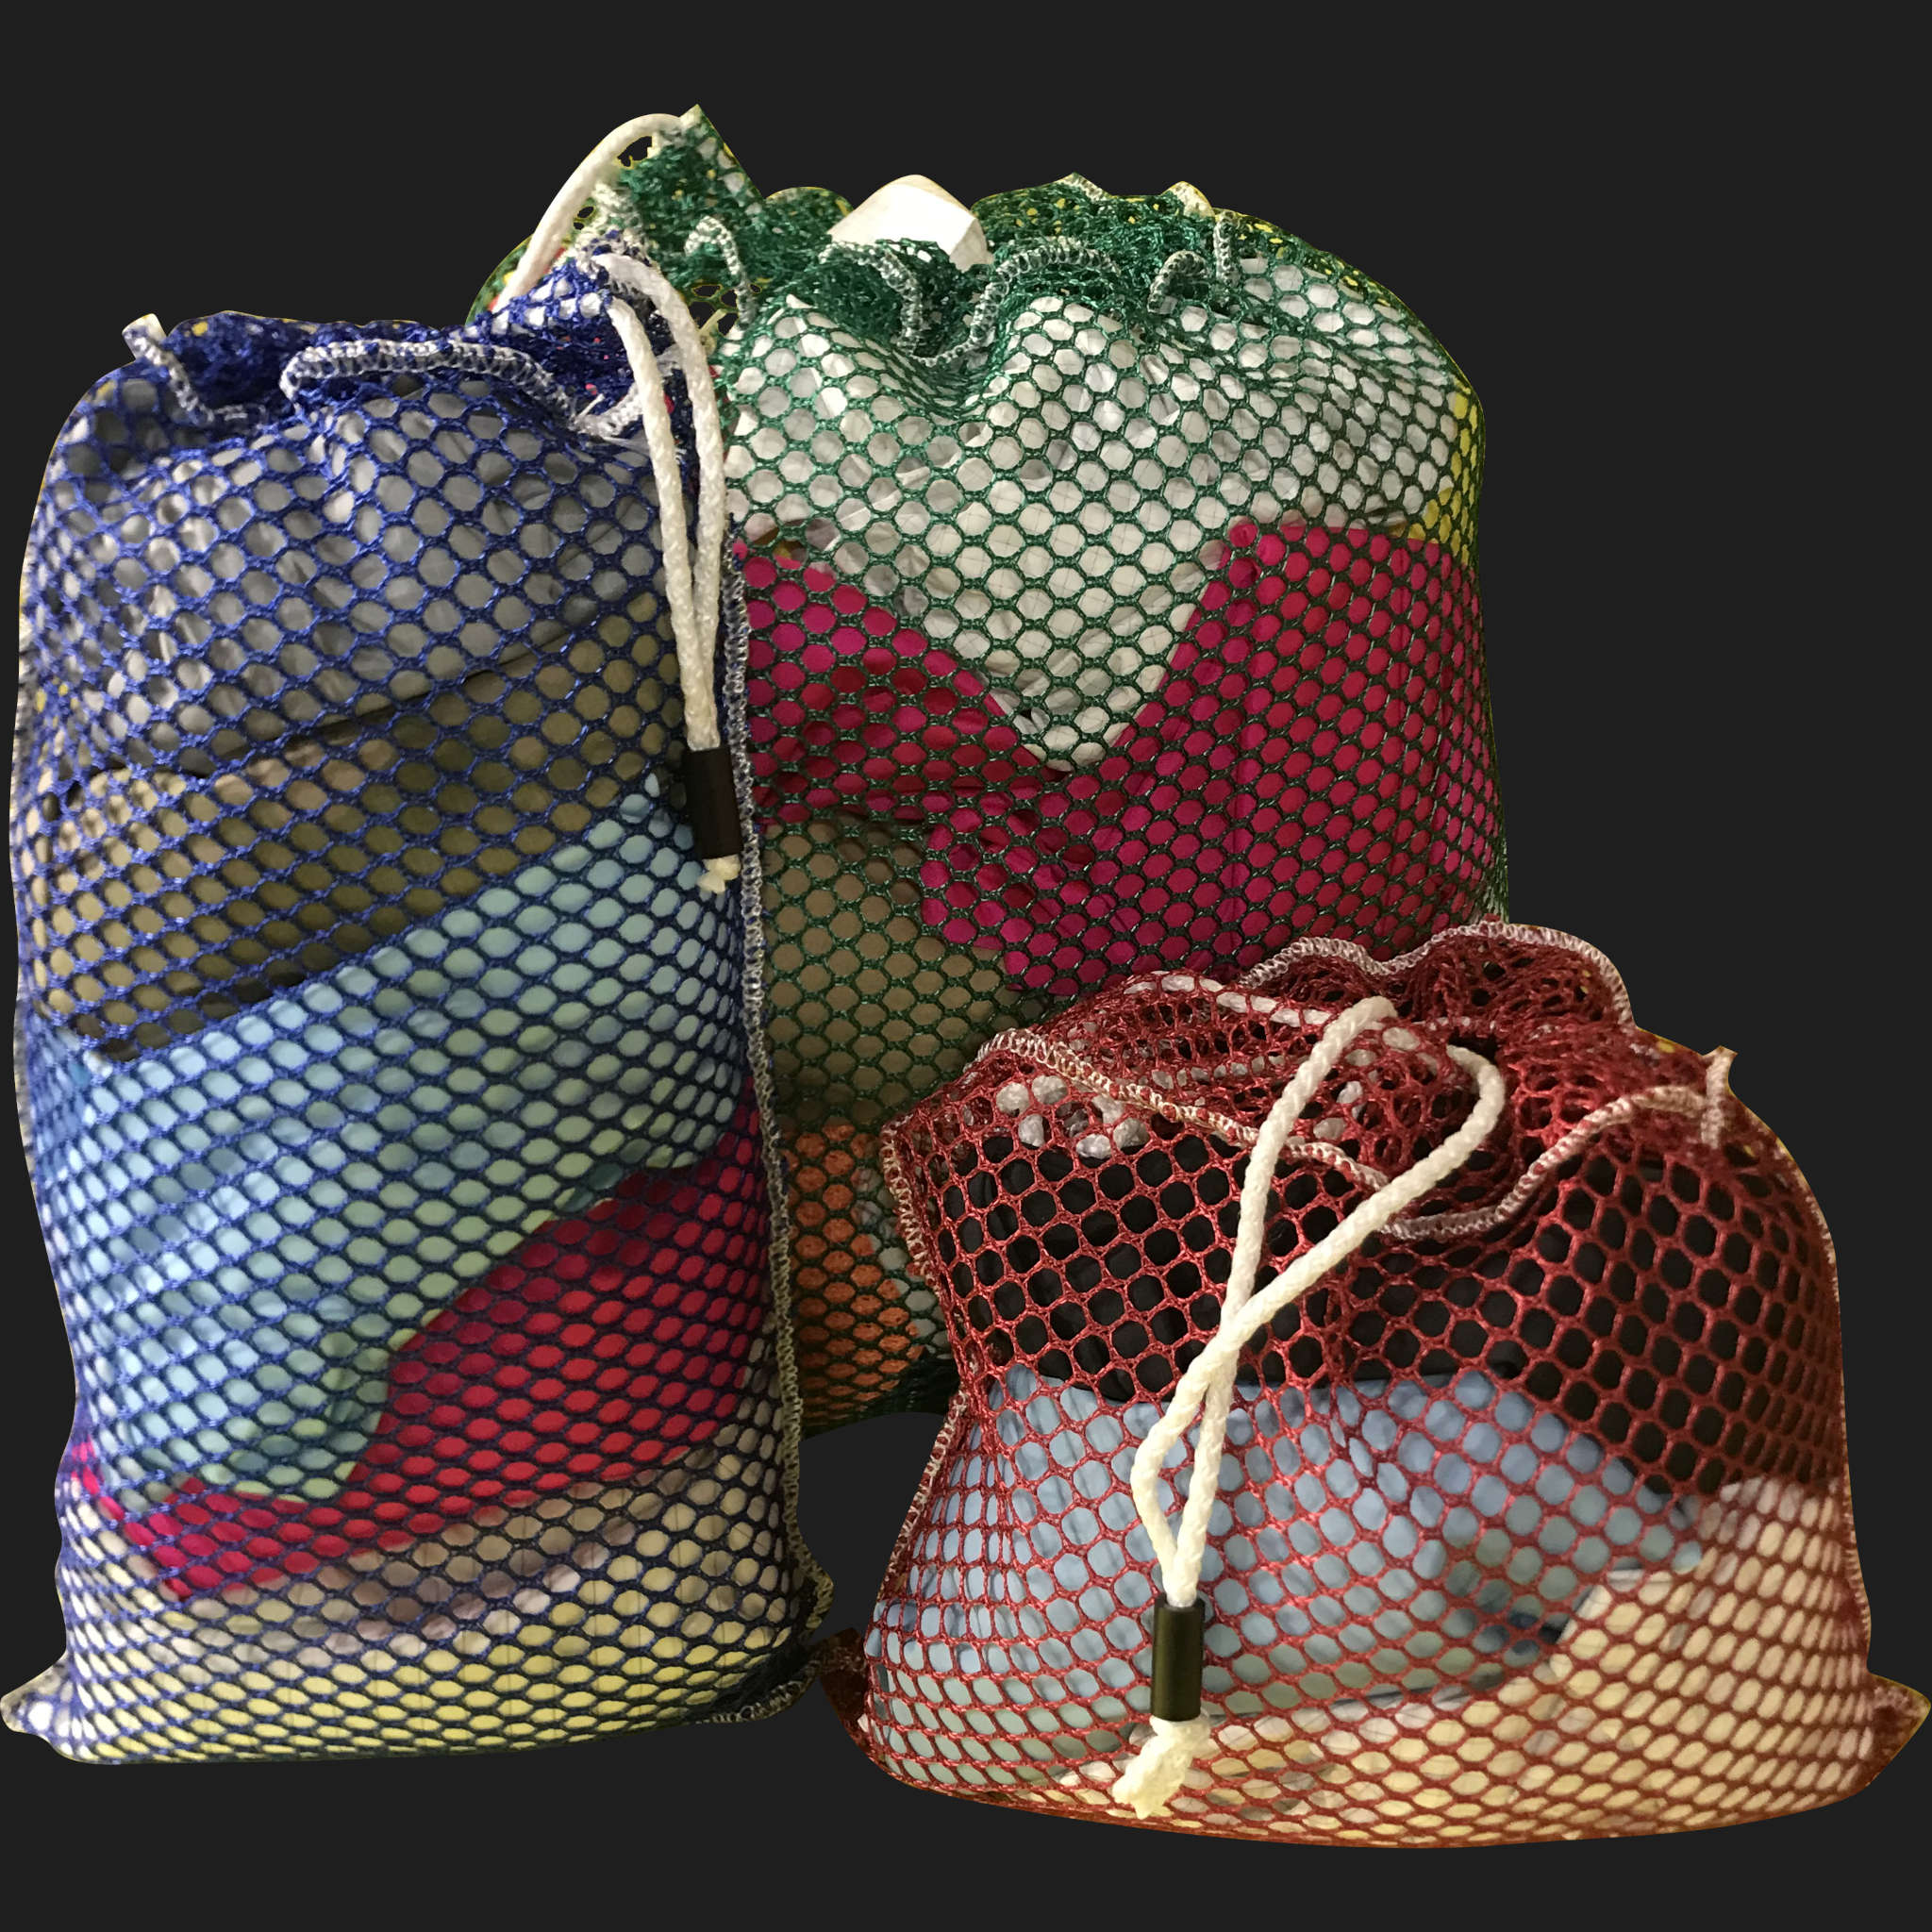 28" x 38" Customized Mesh-Net-Laundry Bags Heavy Duty with Cord and barrellock closure